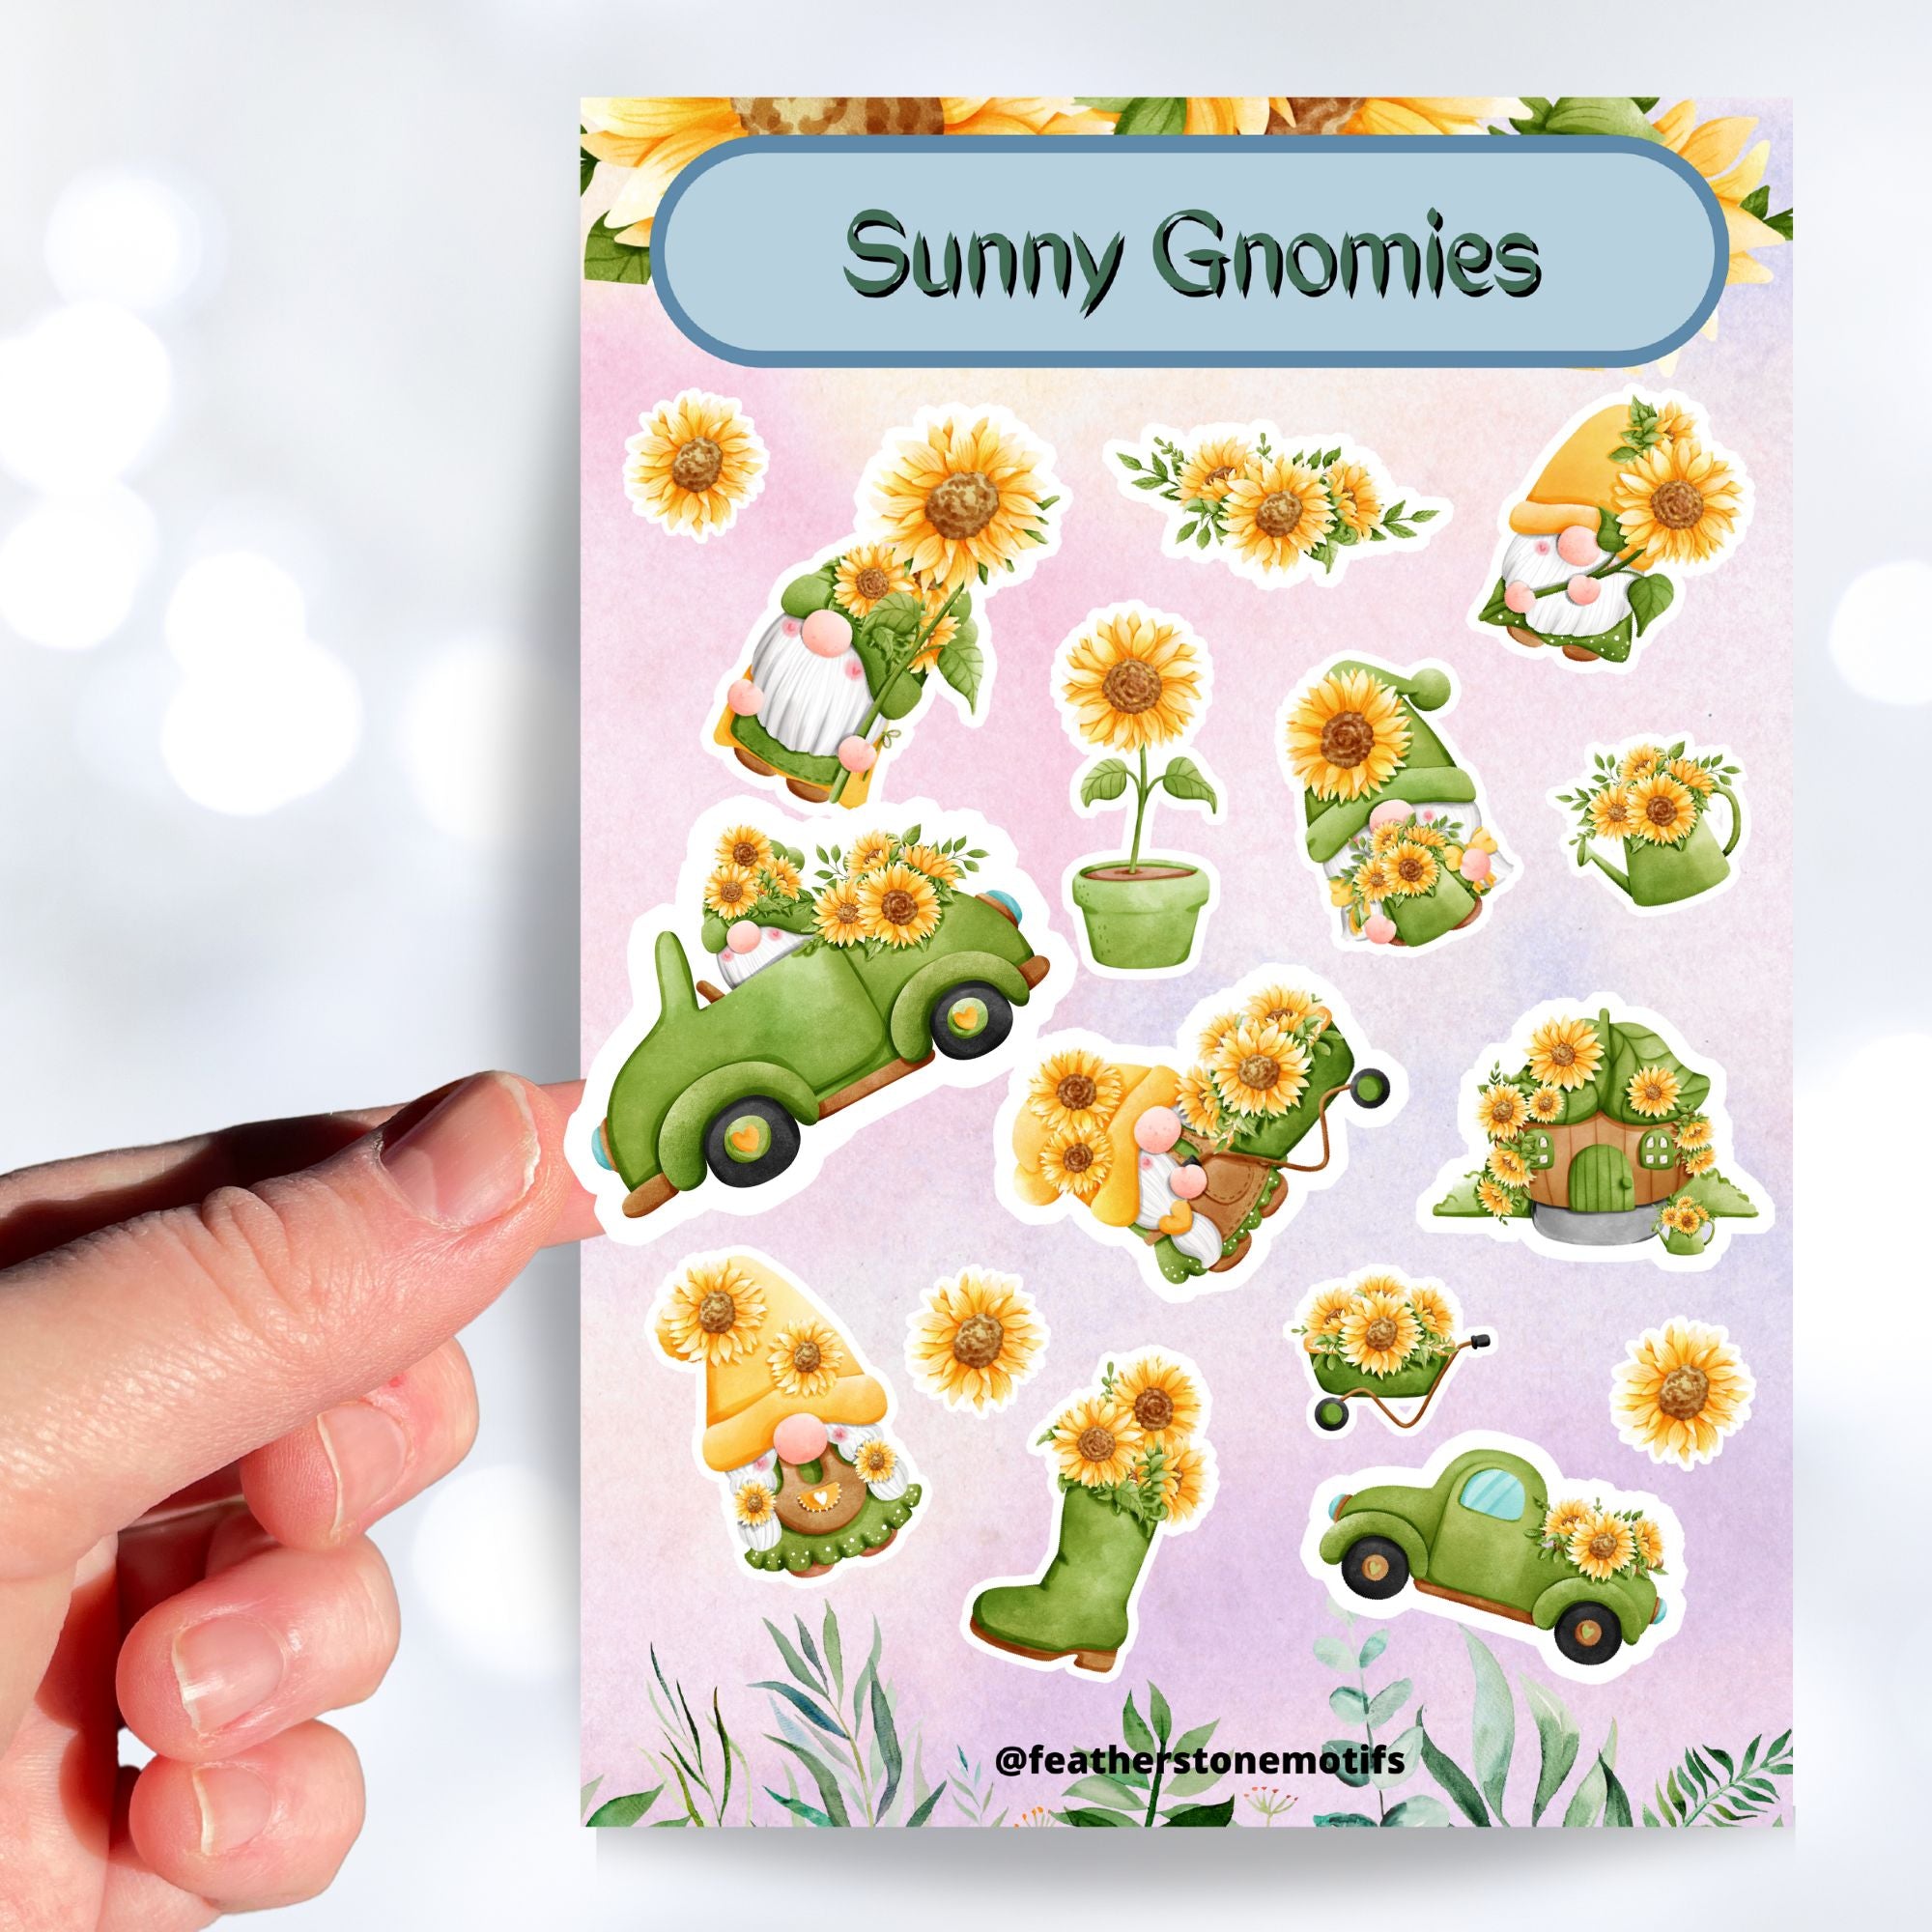 Sunflowers and Gnomes; what a perfect combination! This sticker is filled with stickers of sunflowers and gnomes with sunflowers.  This image shows a hand holding a gnome driving a car full of sunflowers held above the sticker sheet.